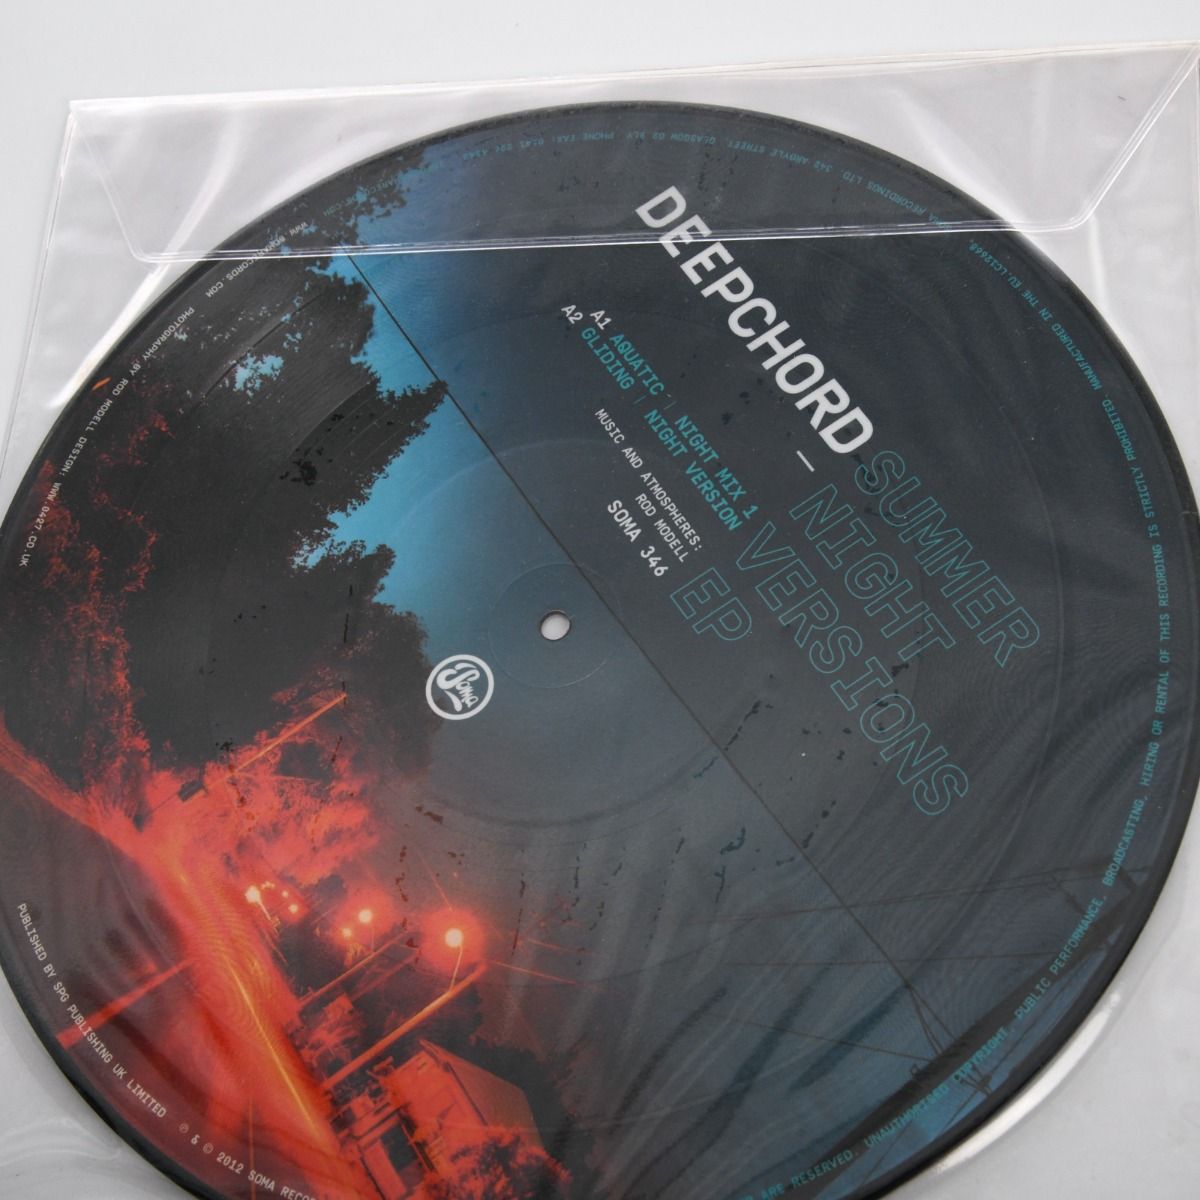 Deepchord – Summer Night Versions 12" (Picture Disc)